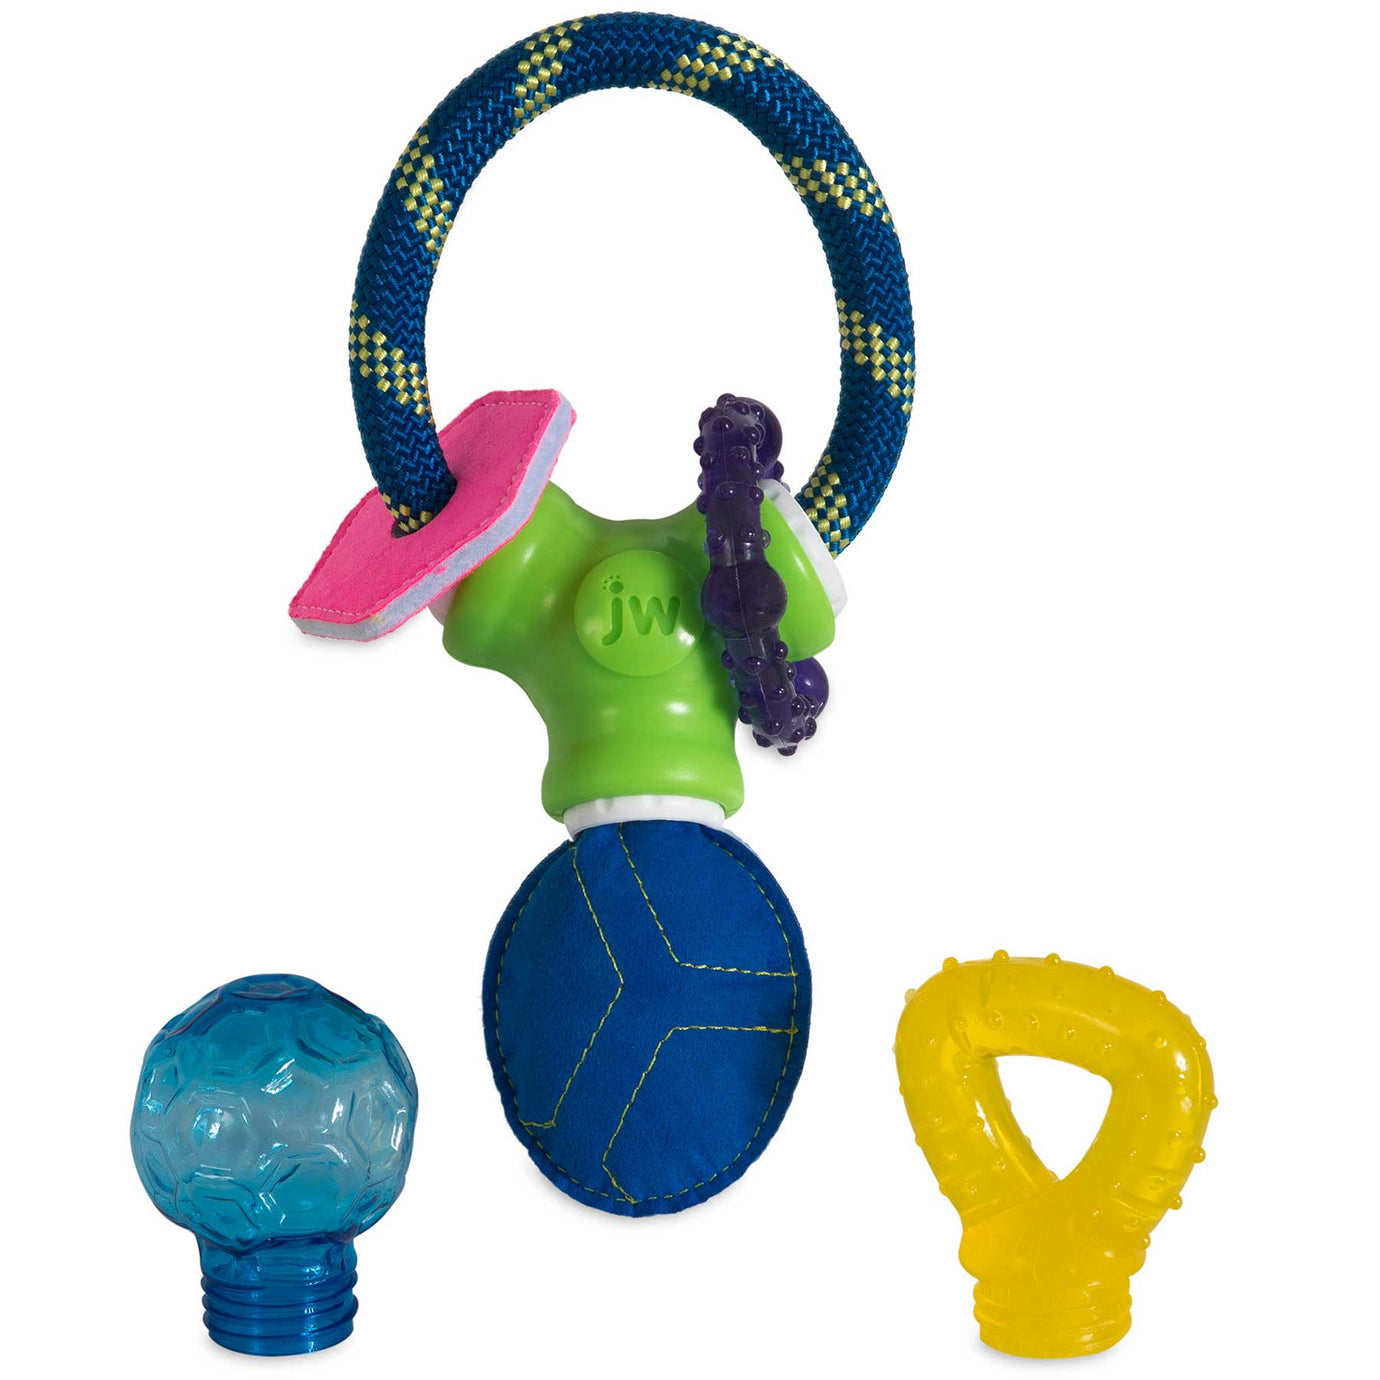 JW Puppy Connects Sooth-ee Toy Set. SKUS: 33213